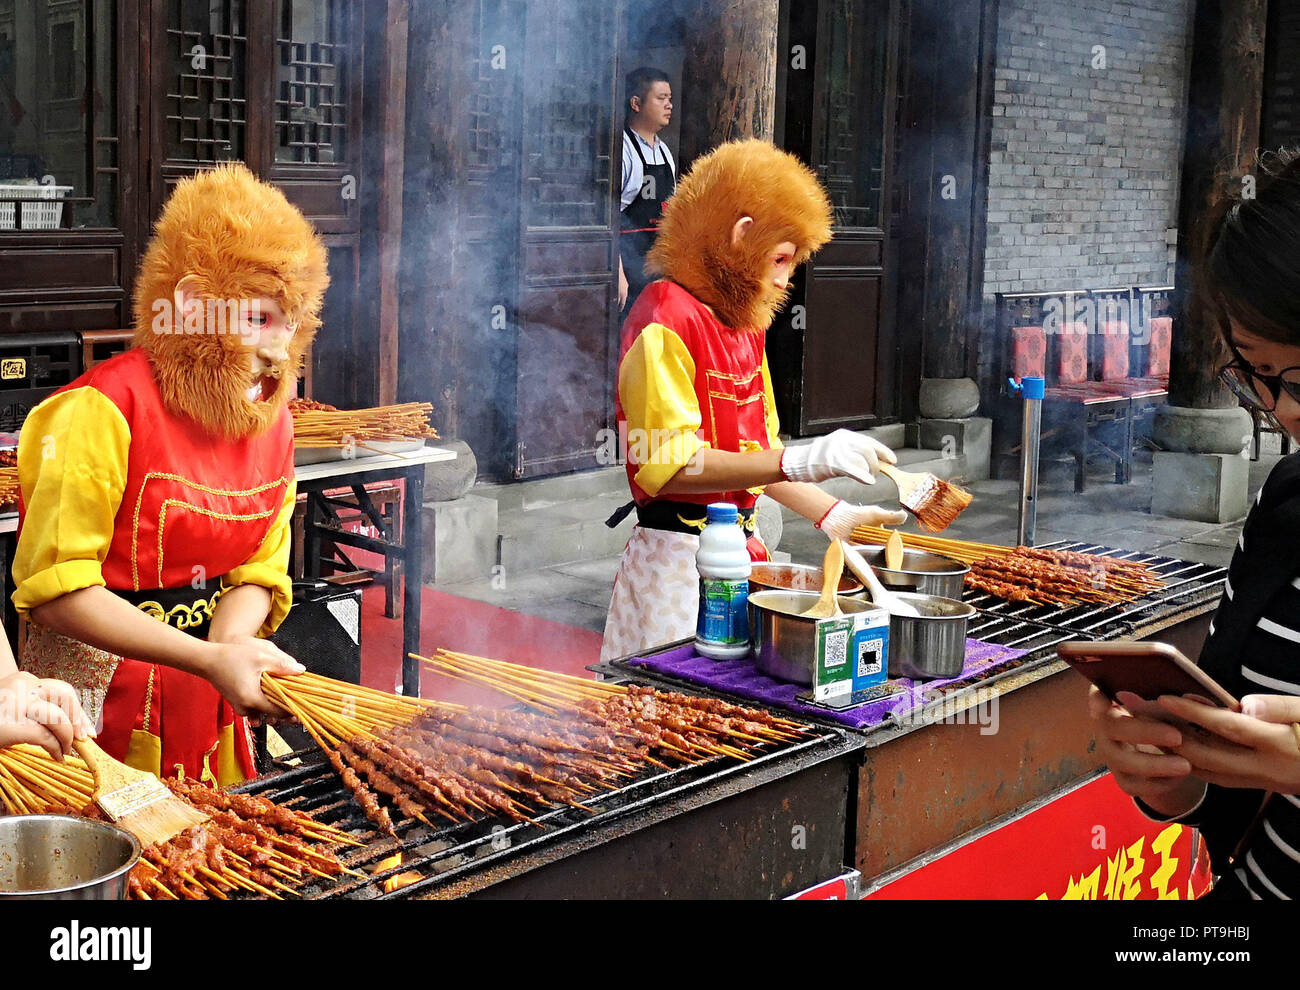 Chongqing Chongqing China 8th Oct 18 Chongqing China Two Men Wearing The Costume Of A A Eœmonkey Kinga A A Sells Barbecued Shish Kebab At A Scenic Area In Southwest Chinaa A A S Chongqing Credit Sipa Asia Zuma Wire Alamy Live